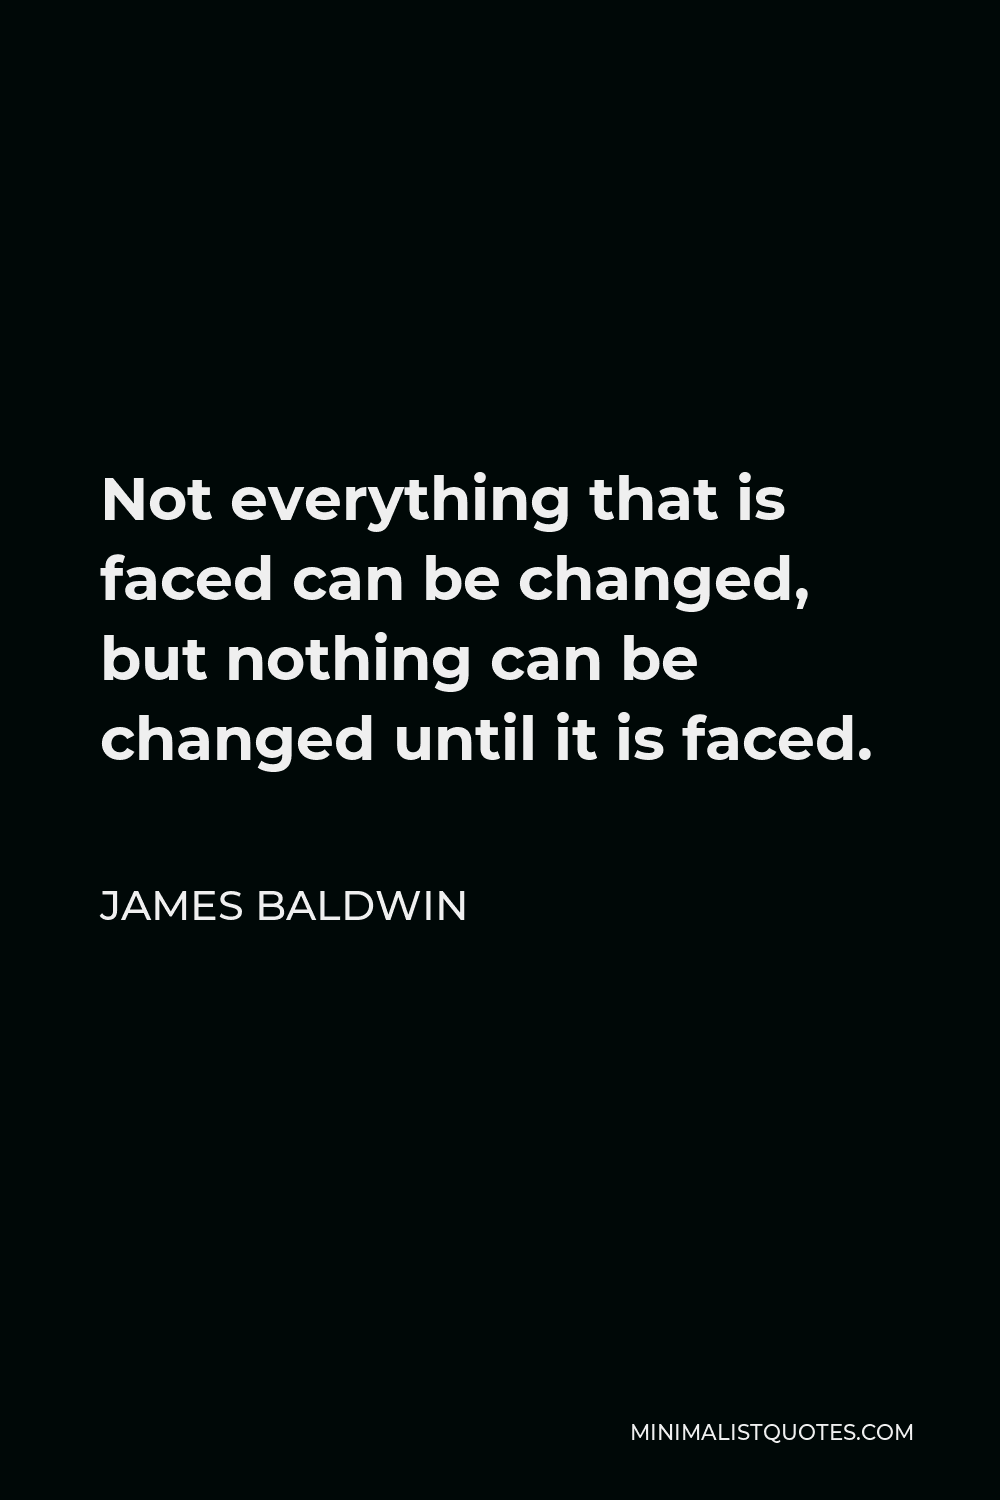 James Baldwin Quote - Not everything that is faced can be changed, but nothing can be changed until it is faced.